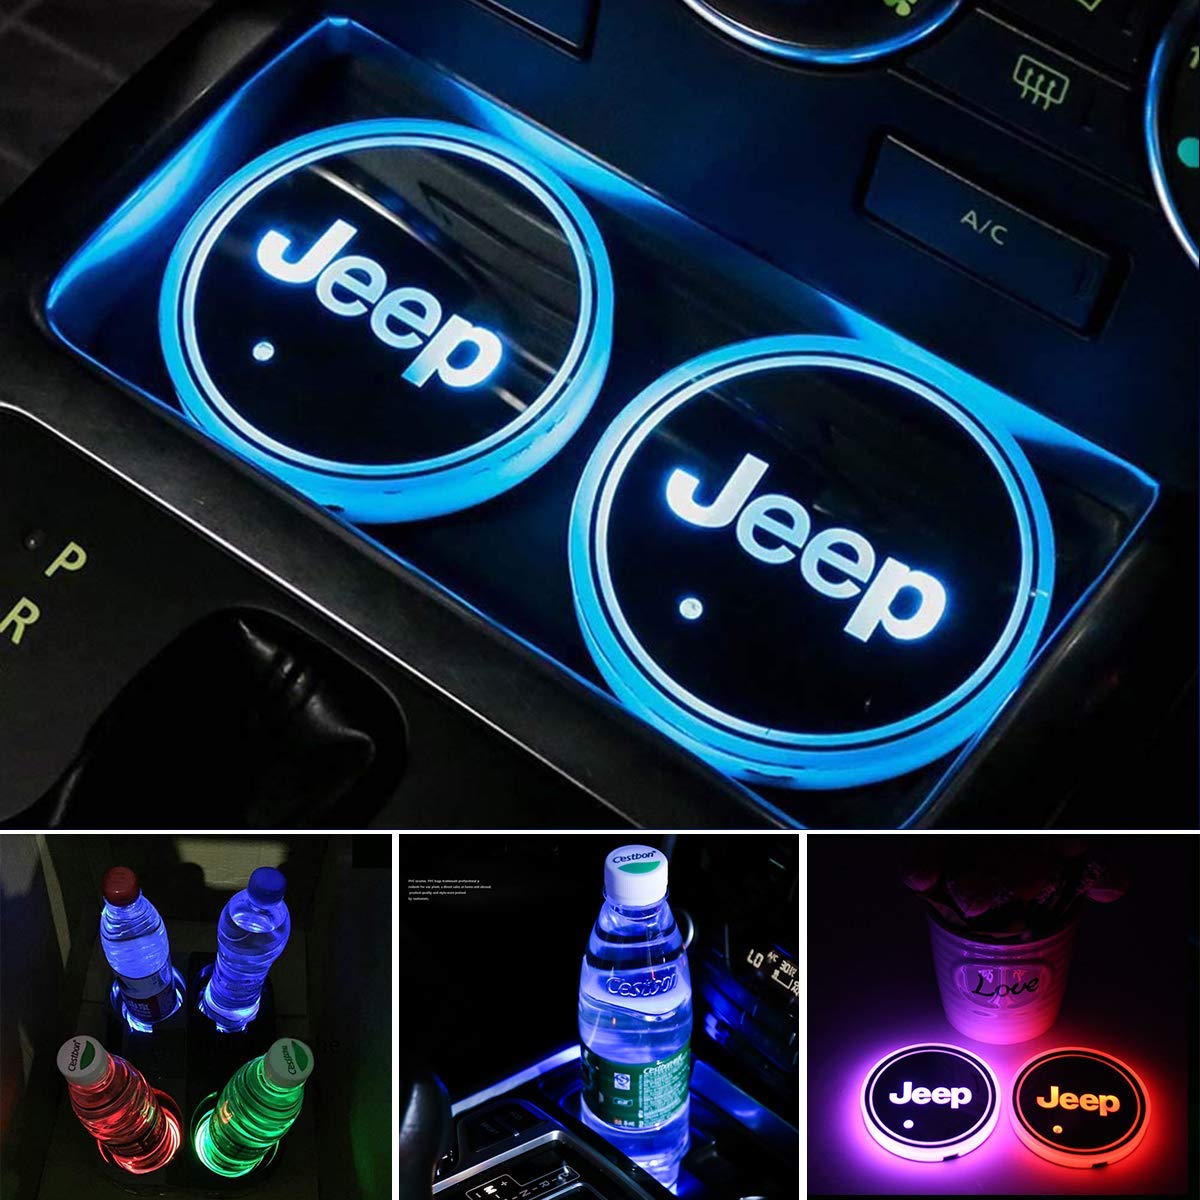 LED Car Cup Holder Lights for Jeep - 2 Pcs - OffGrid Store